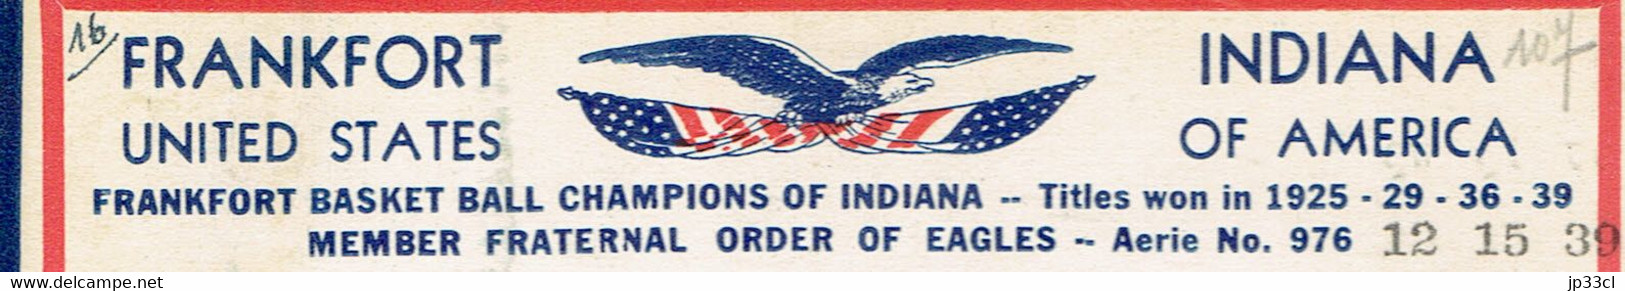 Basket Ball : Vintage Card From Frankfort (Champions Of Indiana 1925 - 29 - 36 - 39) - Pallacanestro